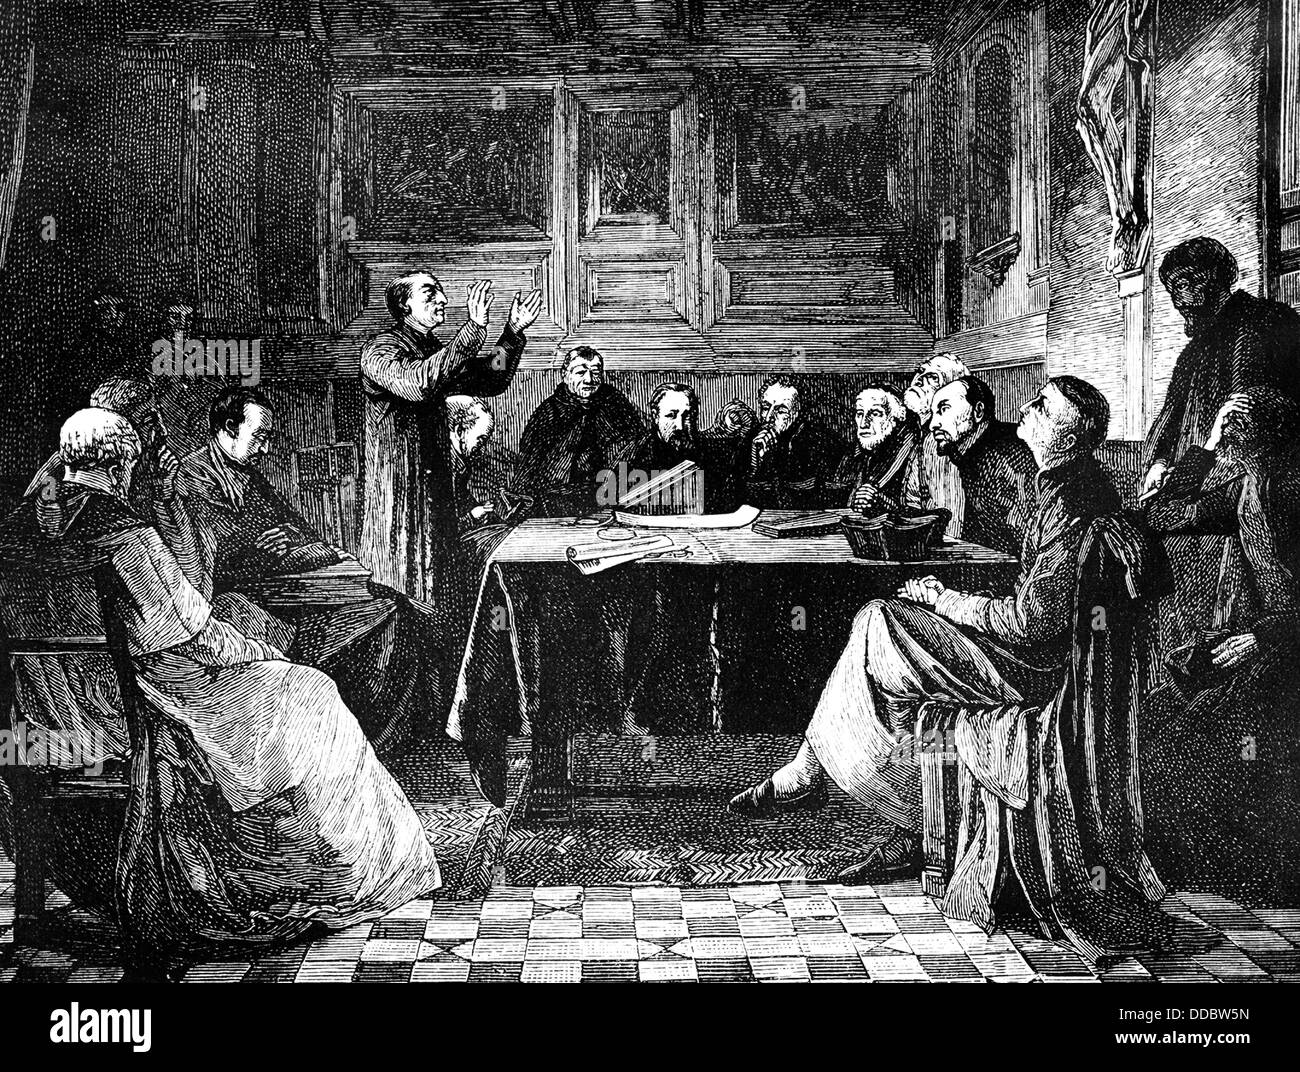 meeting of the calvinists, 16th century, Stock Photo